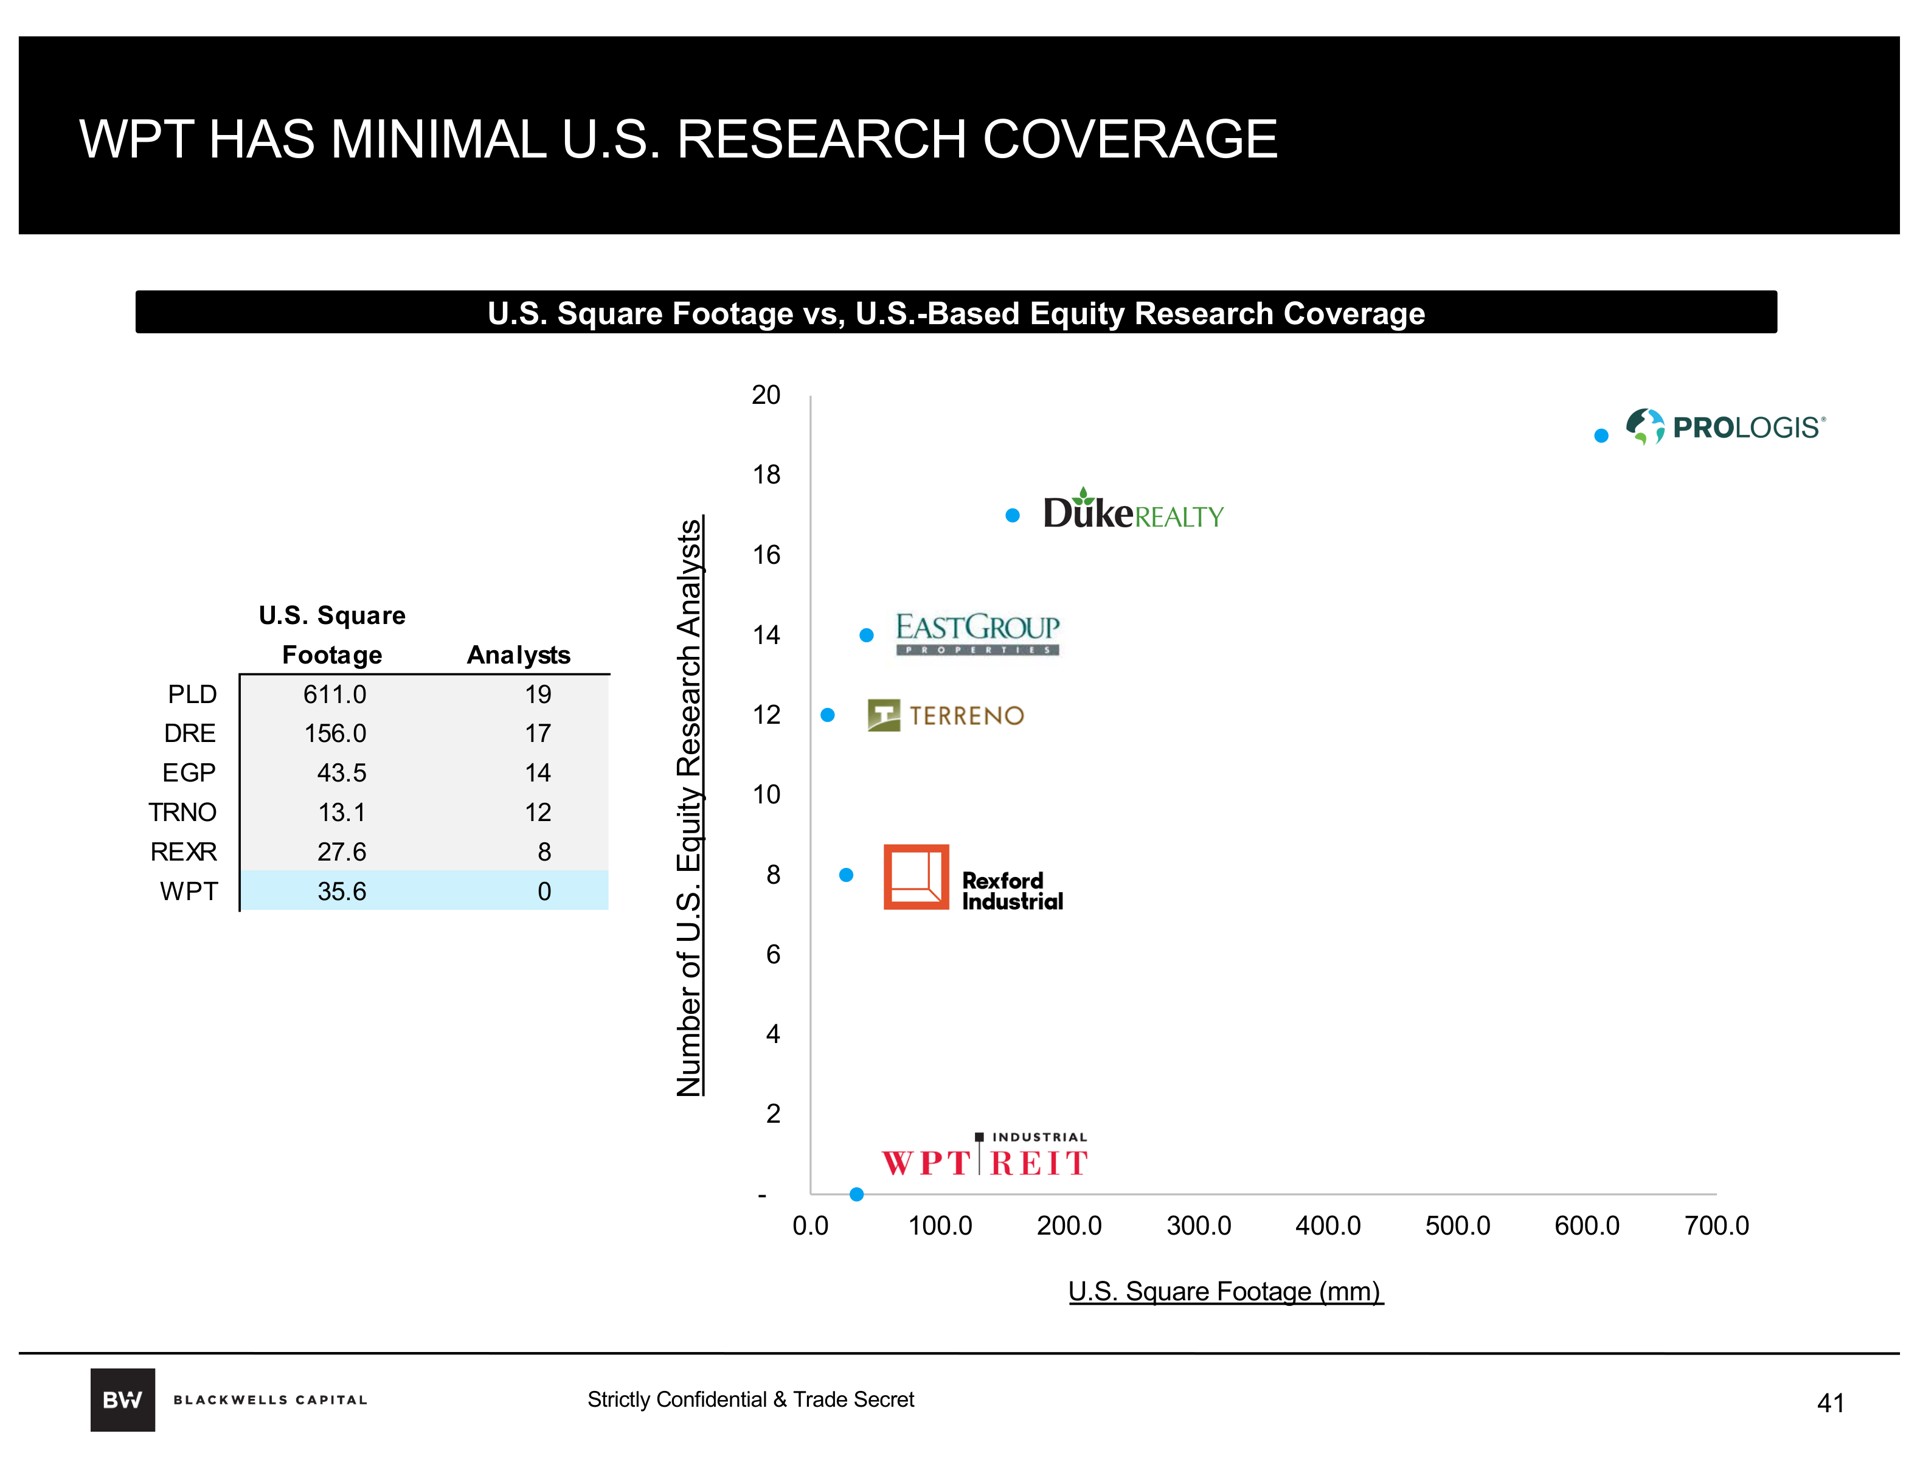 has minimal research coverage | Blackwells Capital